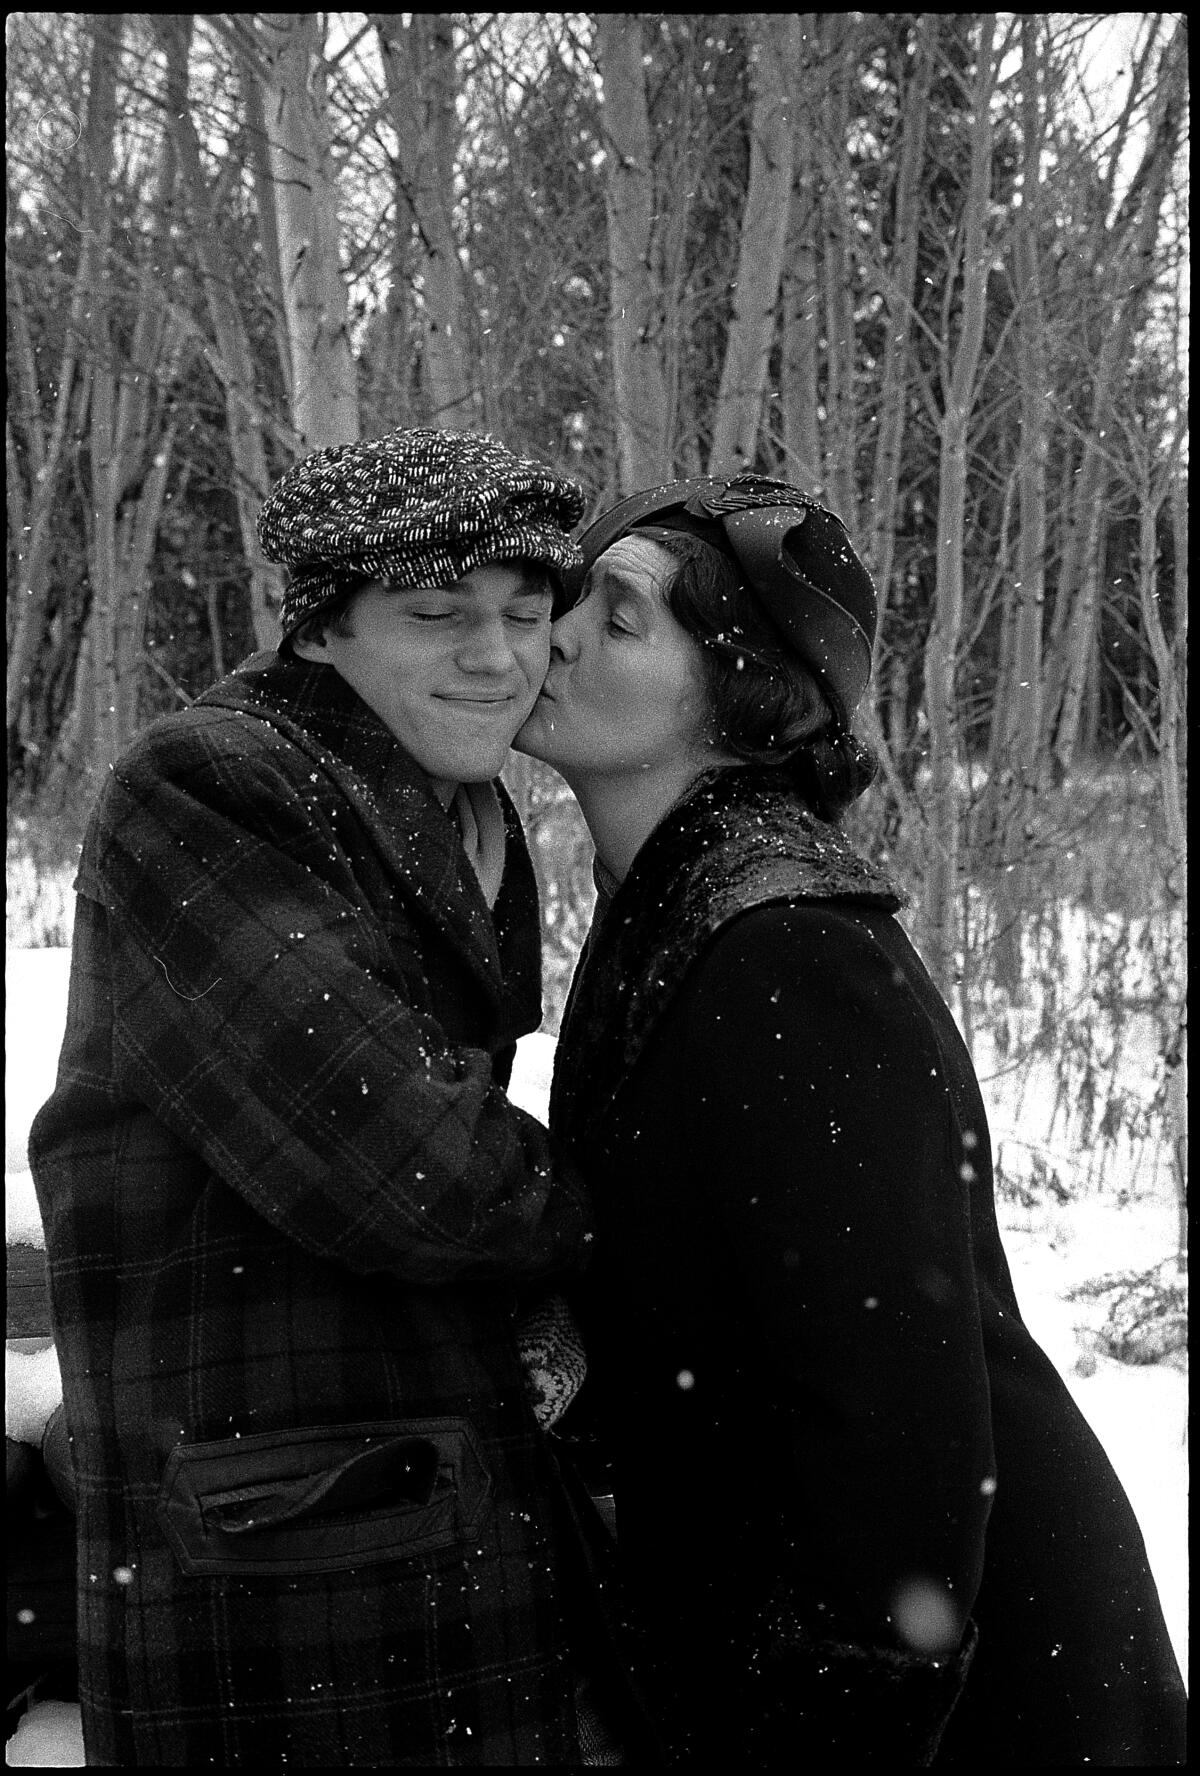 A black-and-white photo of a woman kissing a man's cheek in front of bare trees